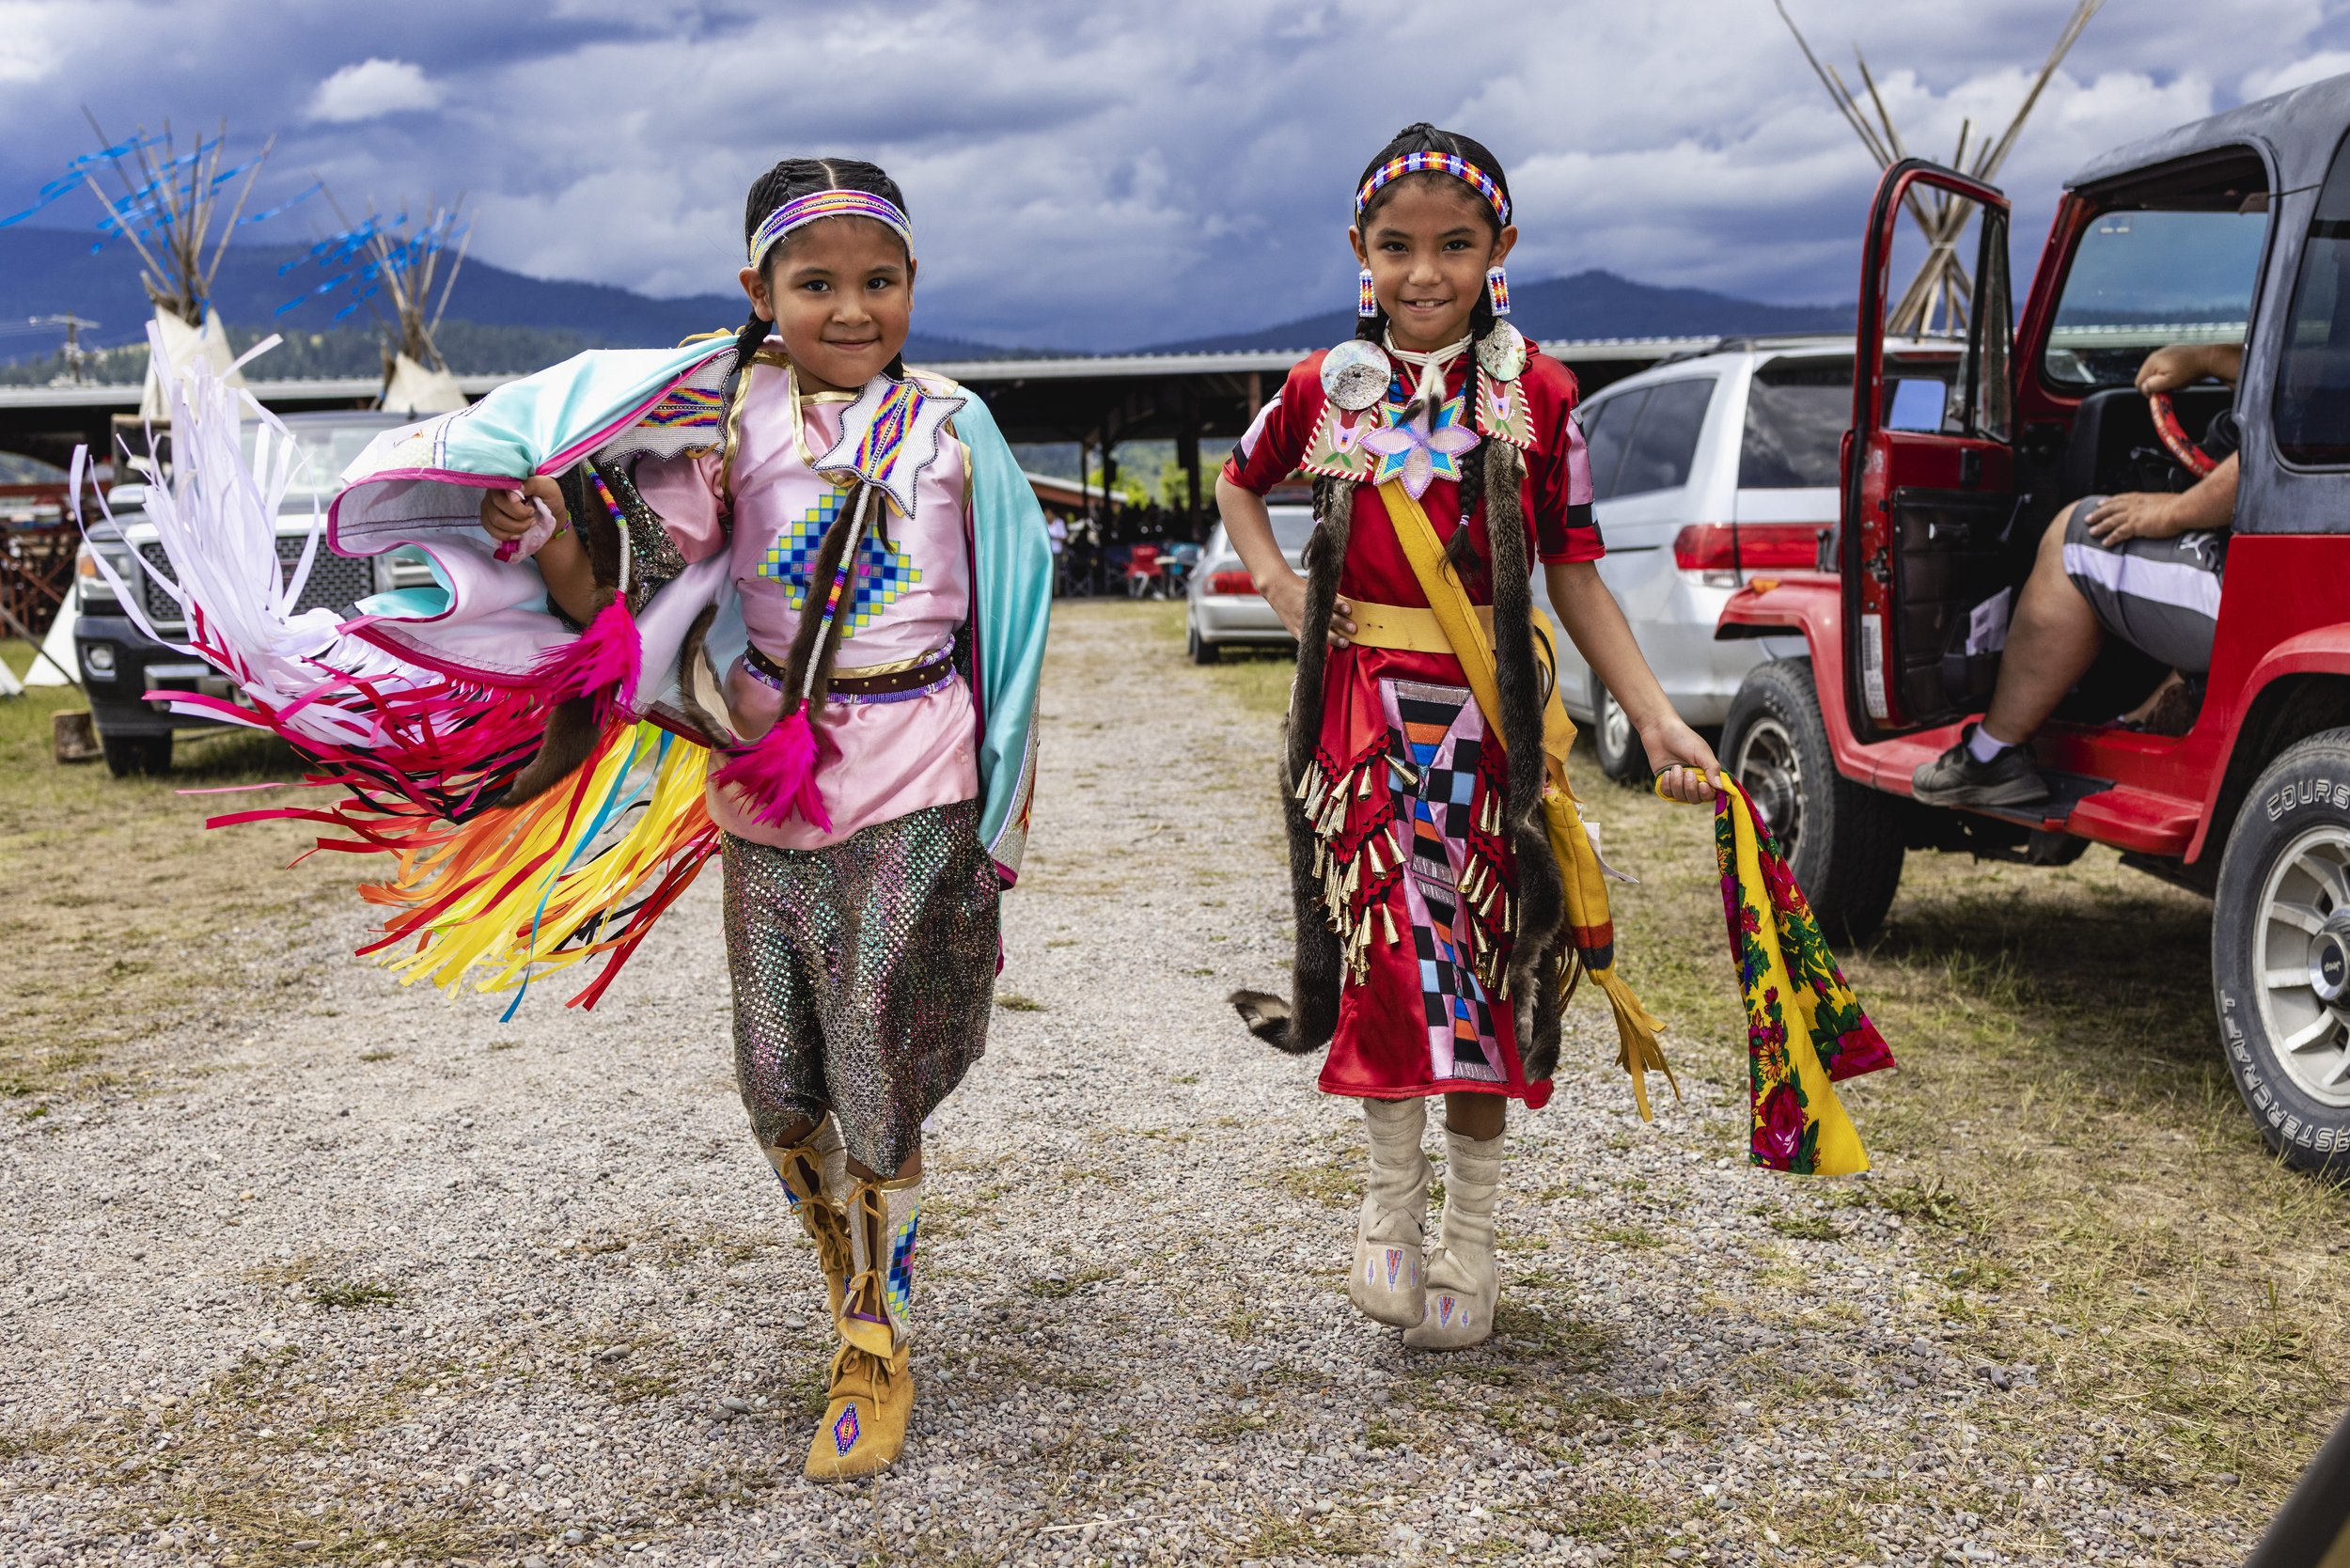   Harmony, 6, and Braylin Kickingwoman, 7, chose the colors for their outfits, which their parents designed. The girls compete in dance categories at the powwows.  